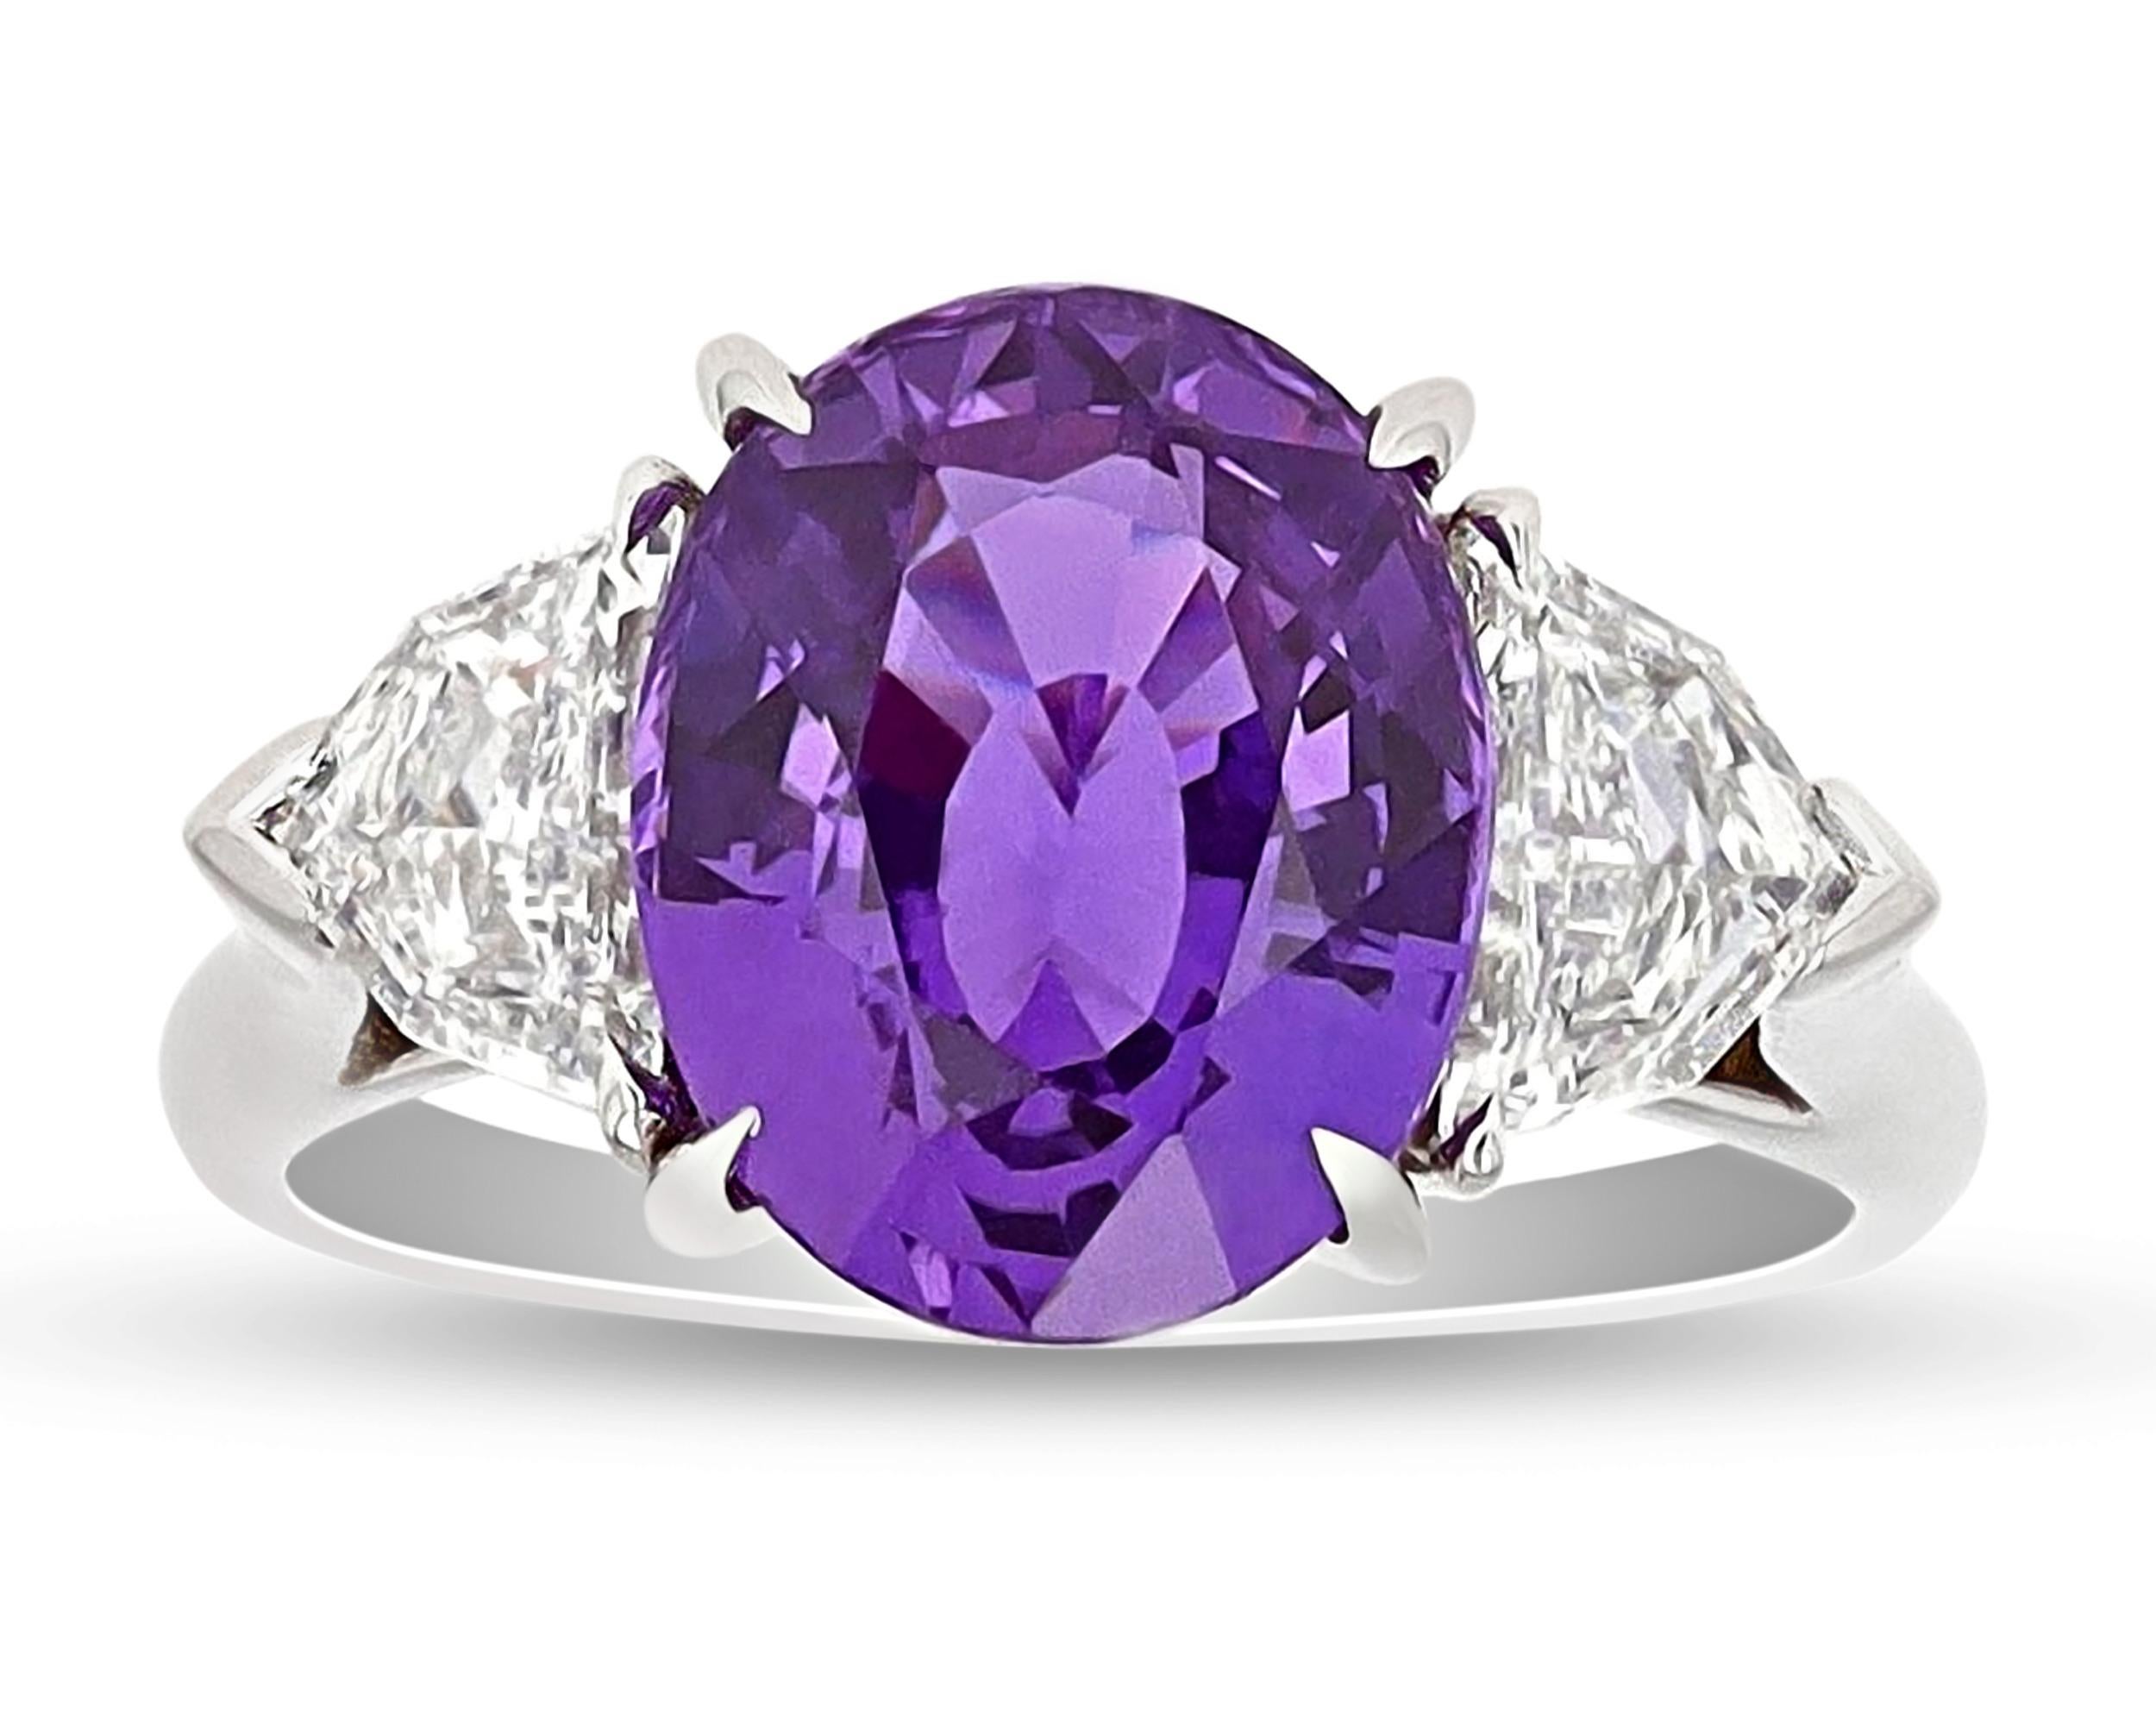 An attractive purple hue, a rare and coveted color for sapphires, distinguishes this stunning ring. Purple sapphires stand among the most highly sought-after colored gemstones and are highly treasured among gem collectors. This highly saturated